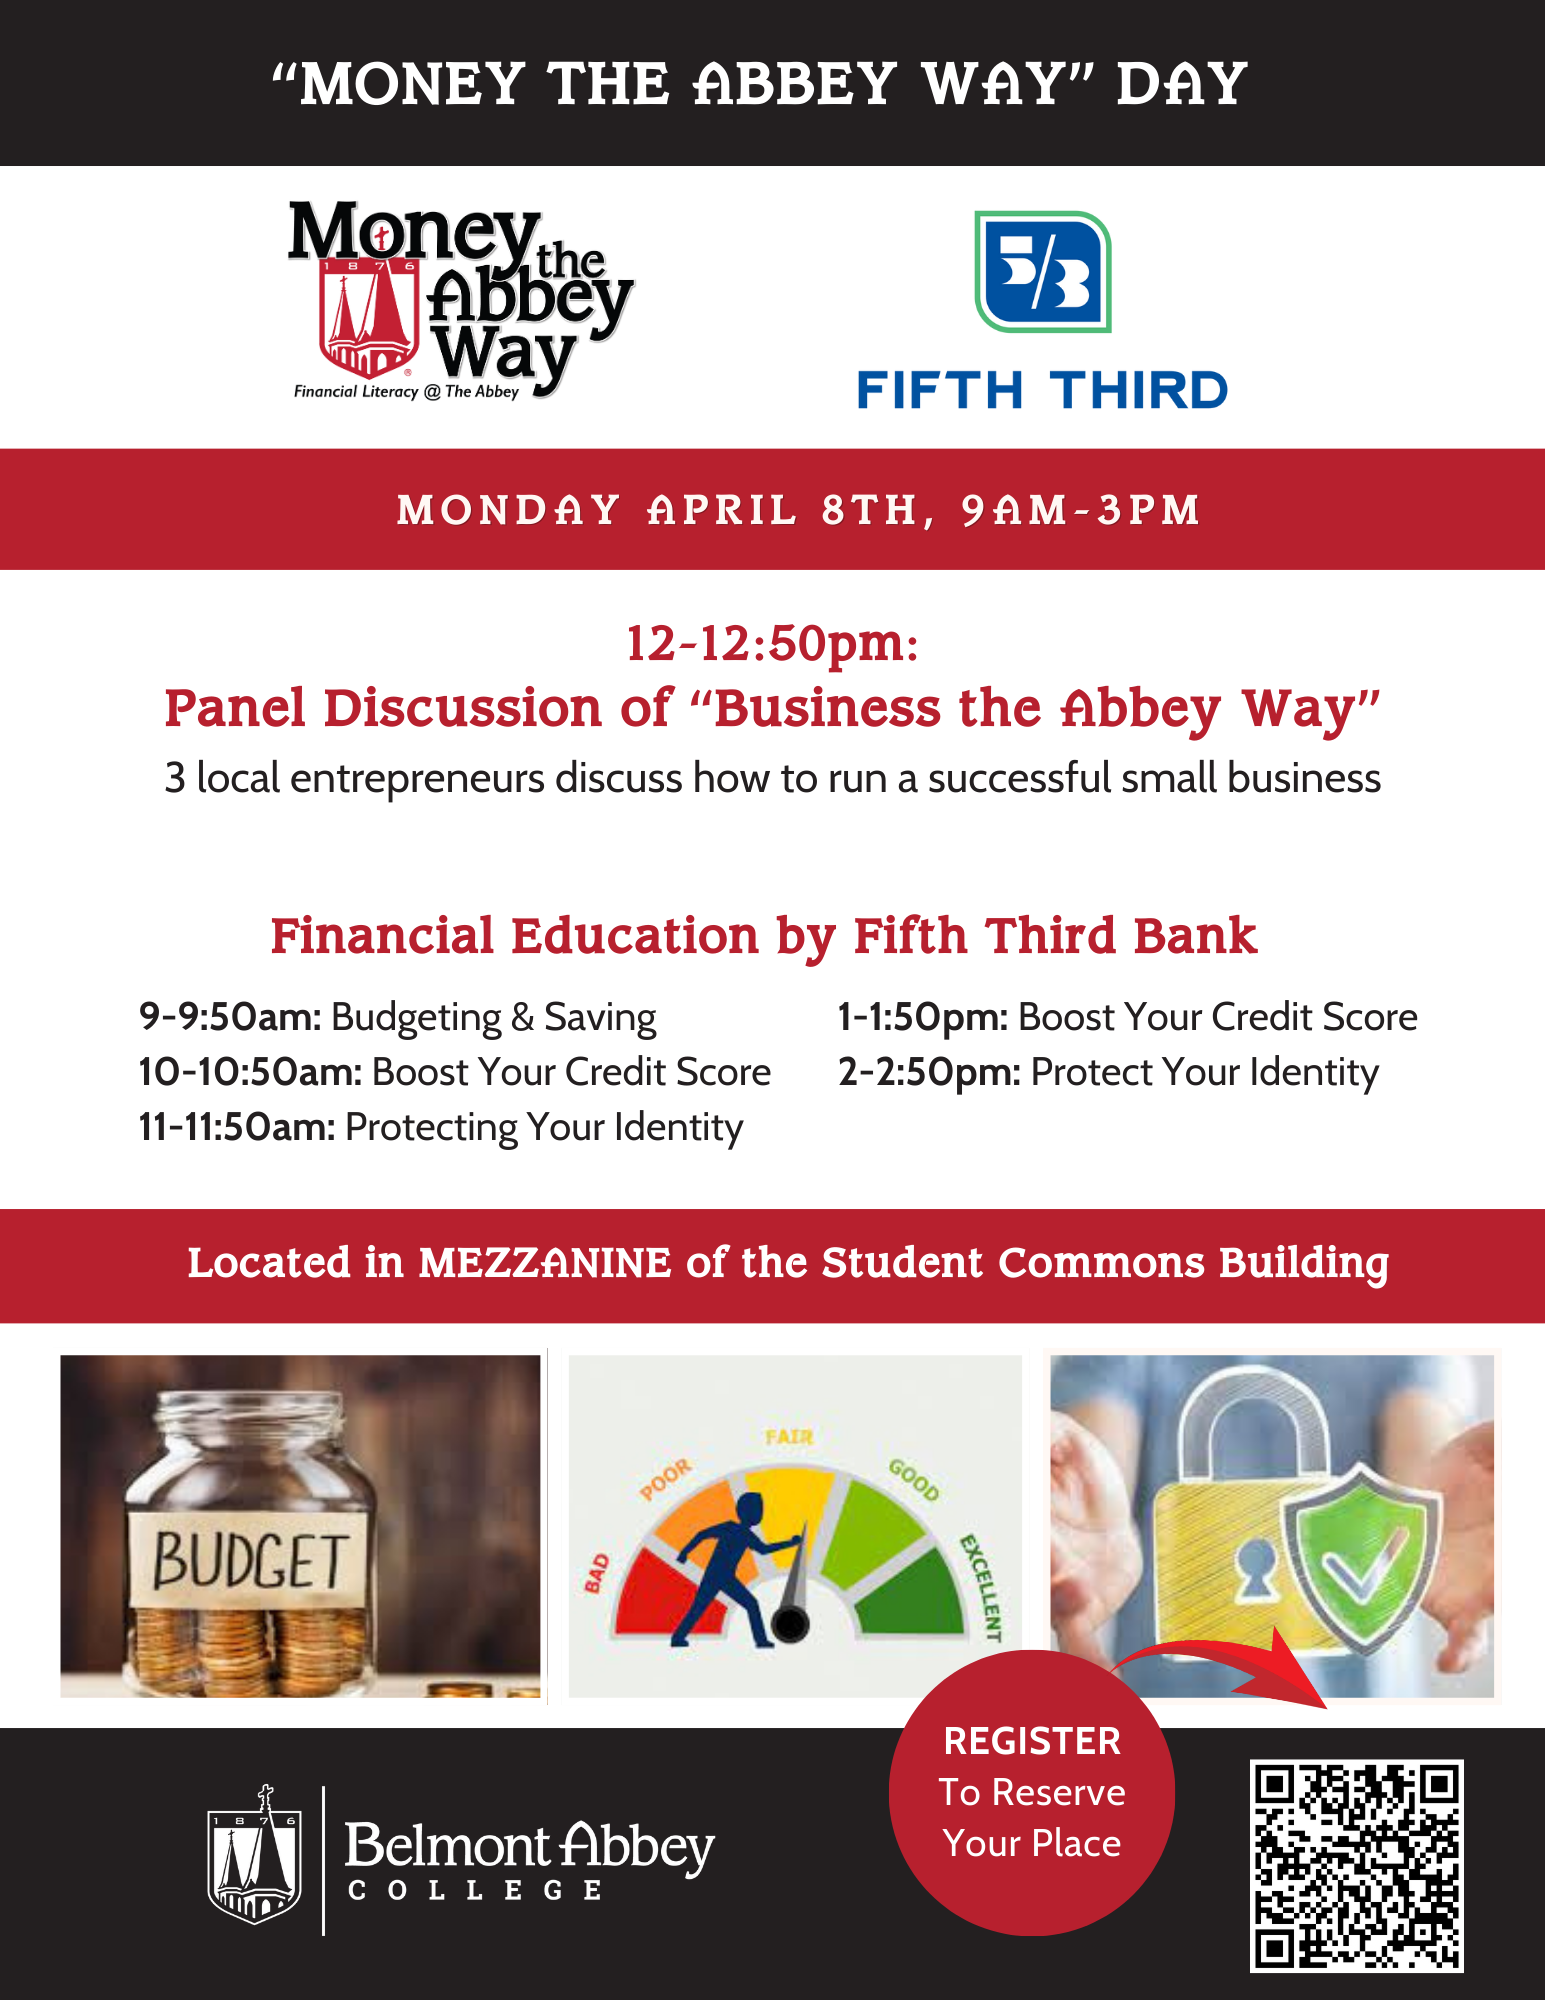 Money the Abbey Way; 12 PM Panel Discussion on Monday April 8th, 9 AM-3 PM events by Fifth Third Bank on financial literacy, all in the Mezzanine.